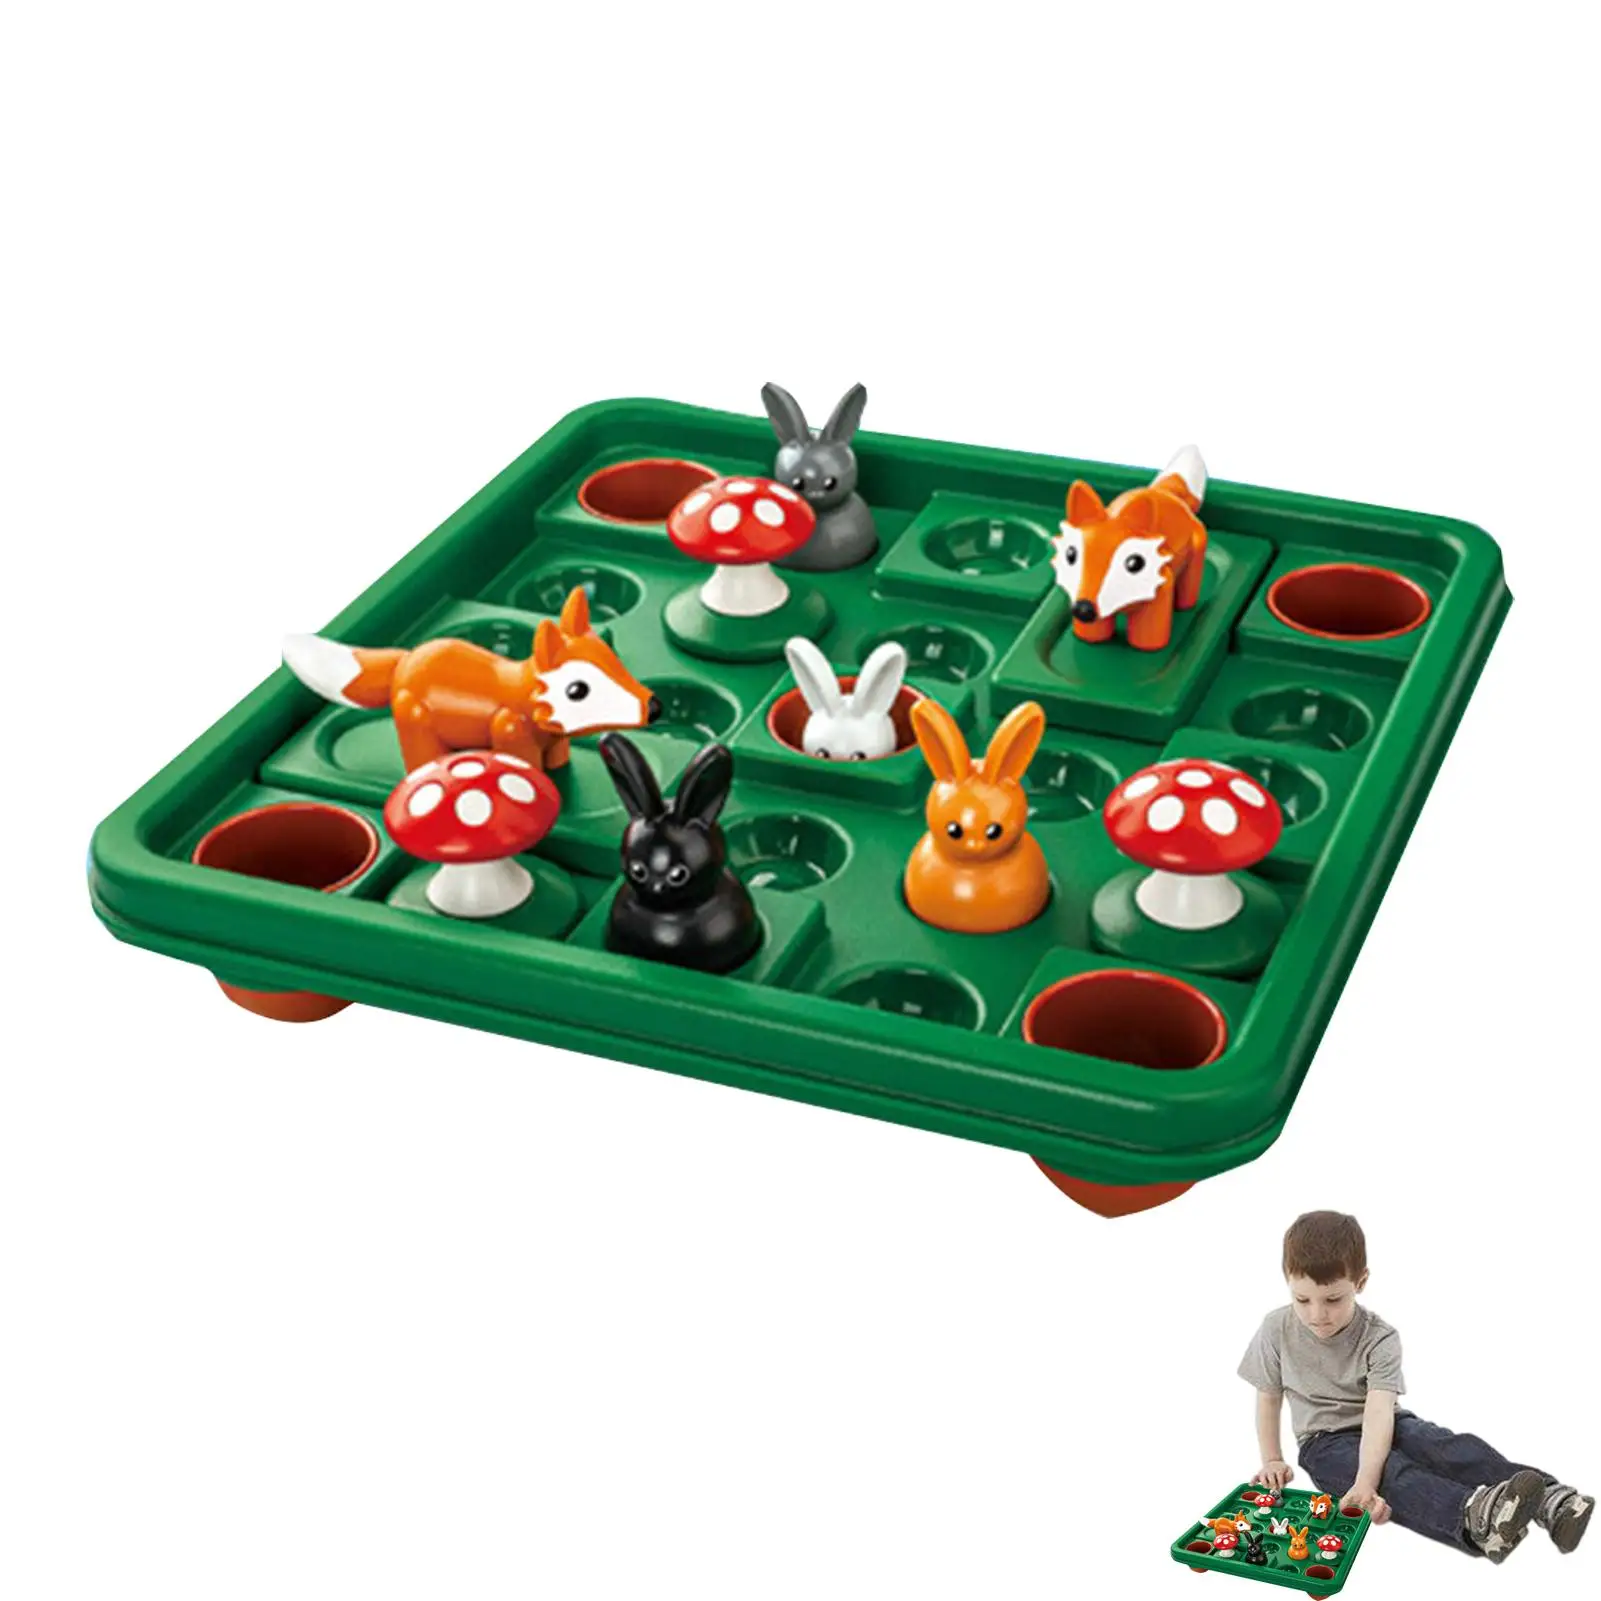 

Bunny Rabbit Competitive Trap Tablet Board Games Funny Rabbit Moving Strategy Tabletop Gift For Children Brain Development